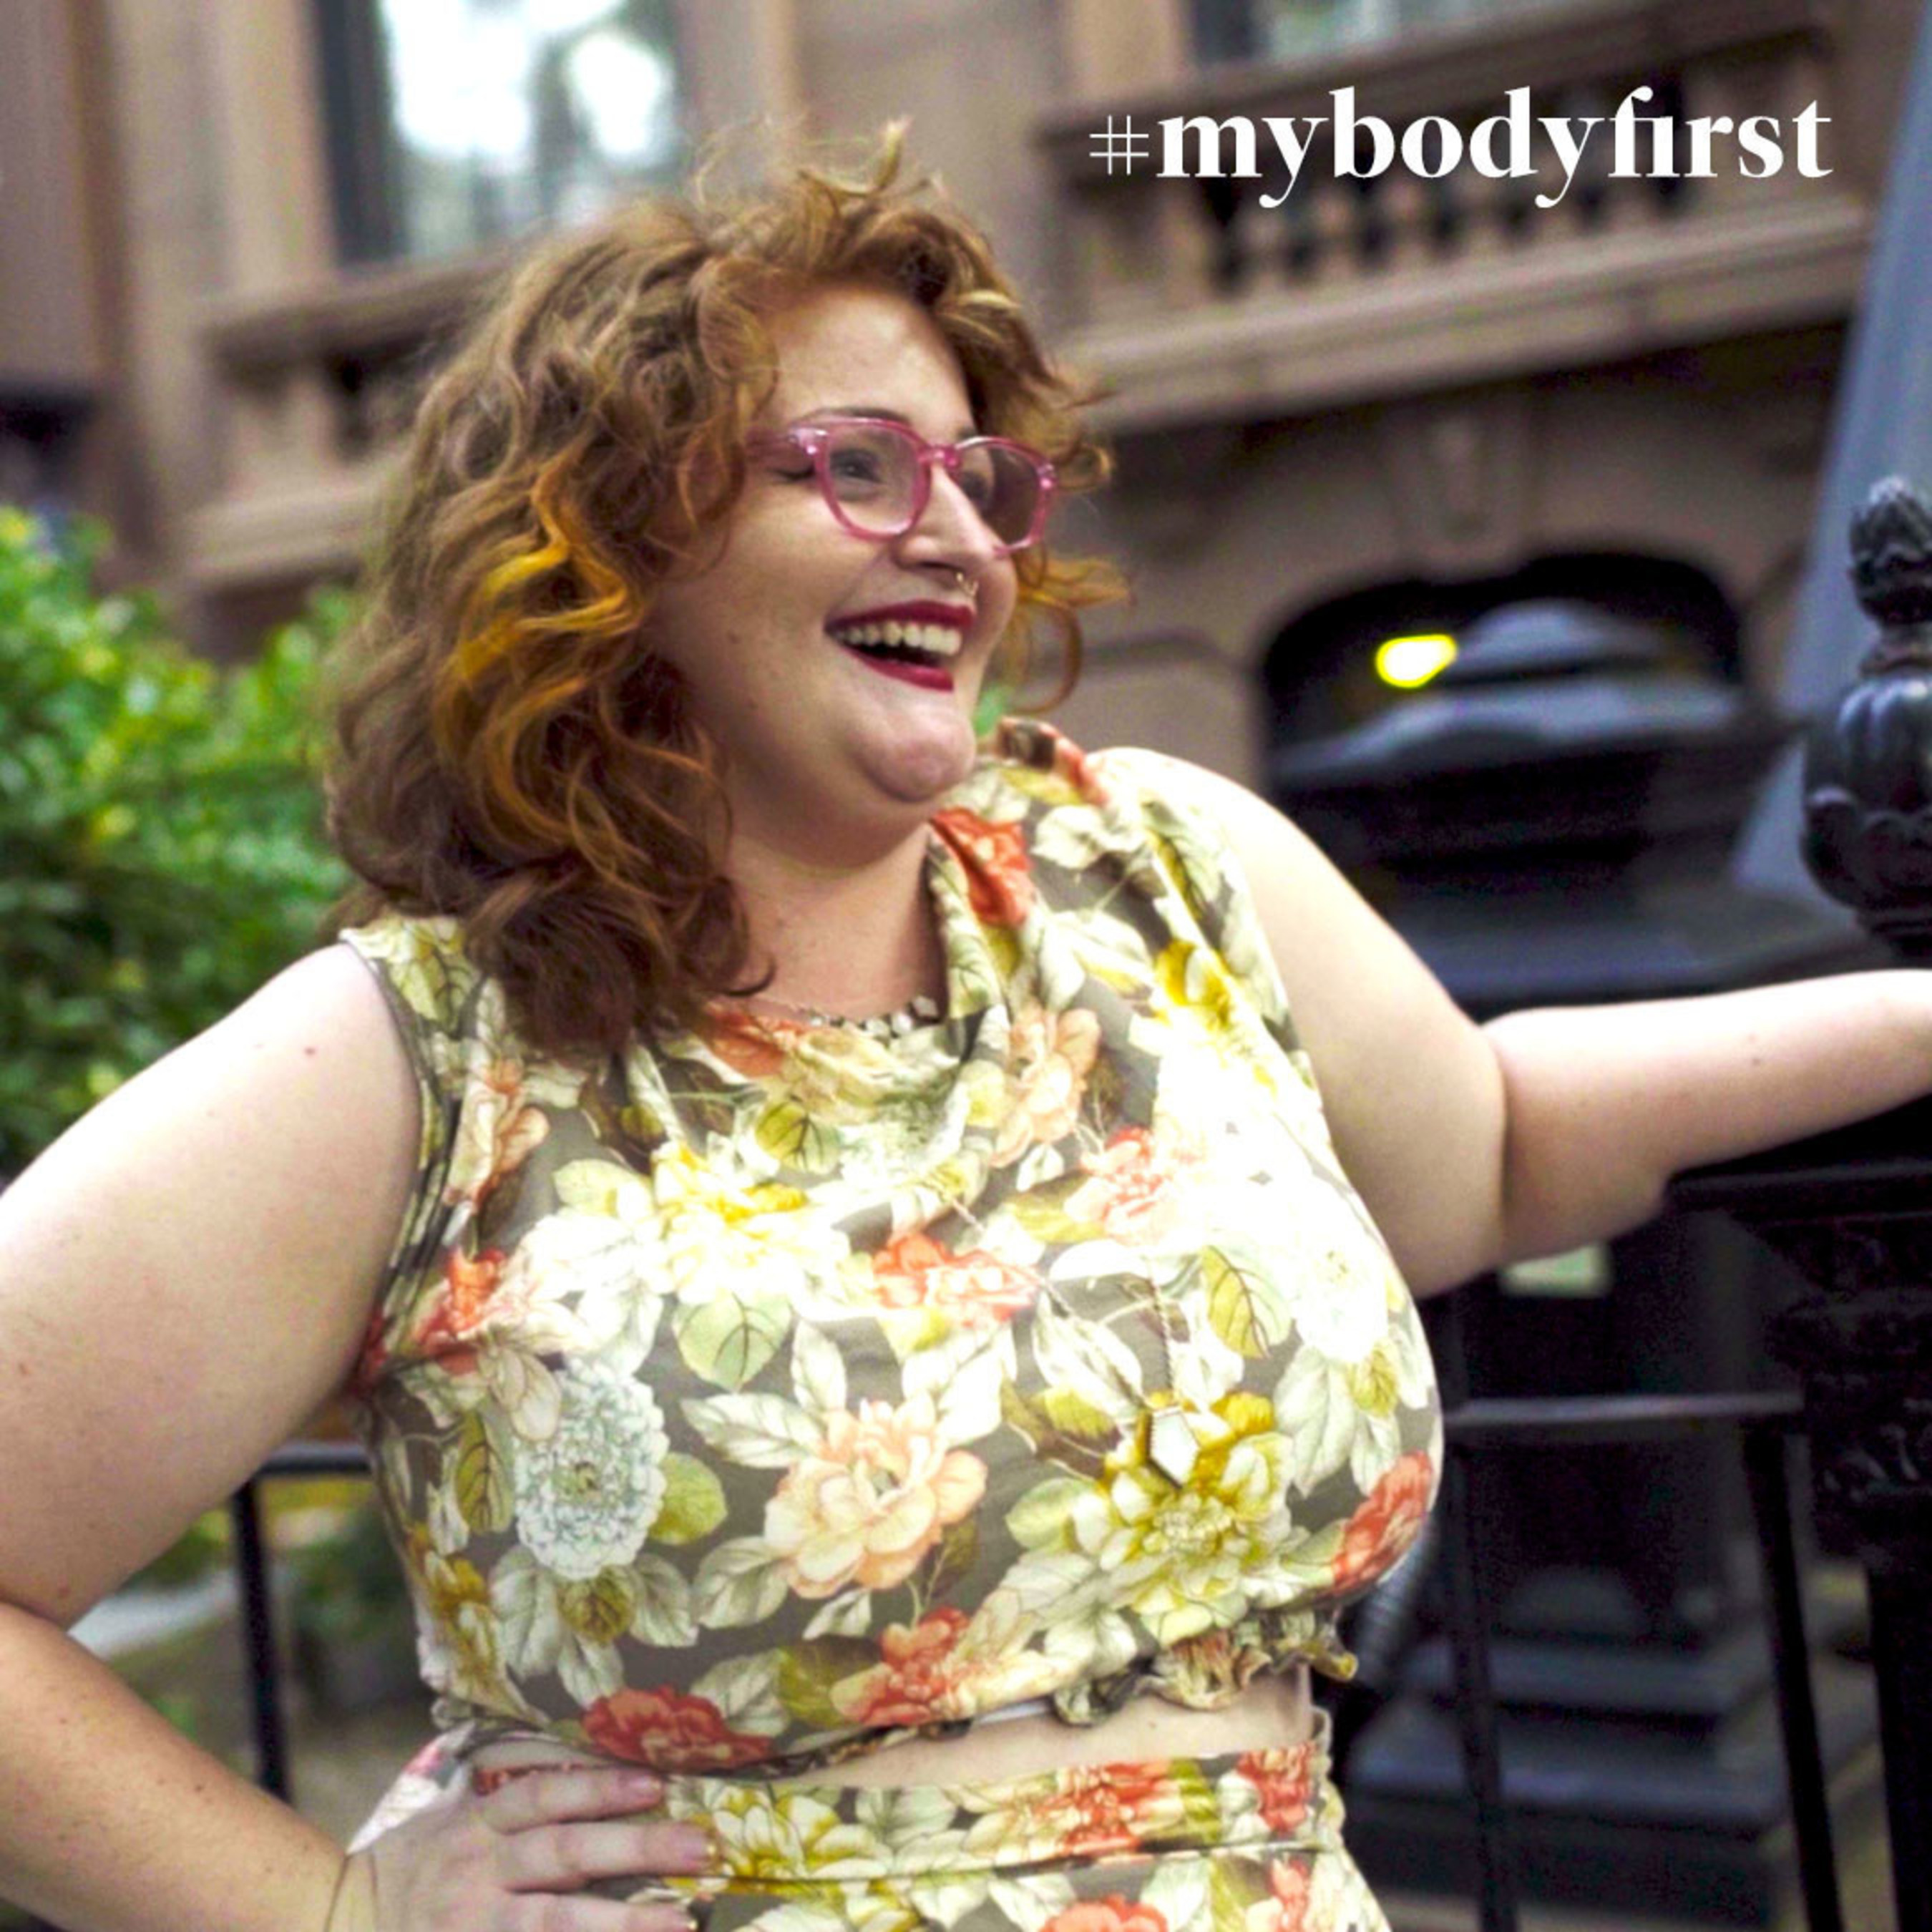 The #mybodyfirst campaign calls for an approach to shopping that celebrates and prioritizes women's actual bodies.